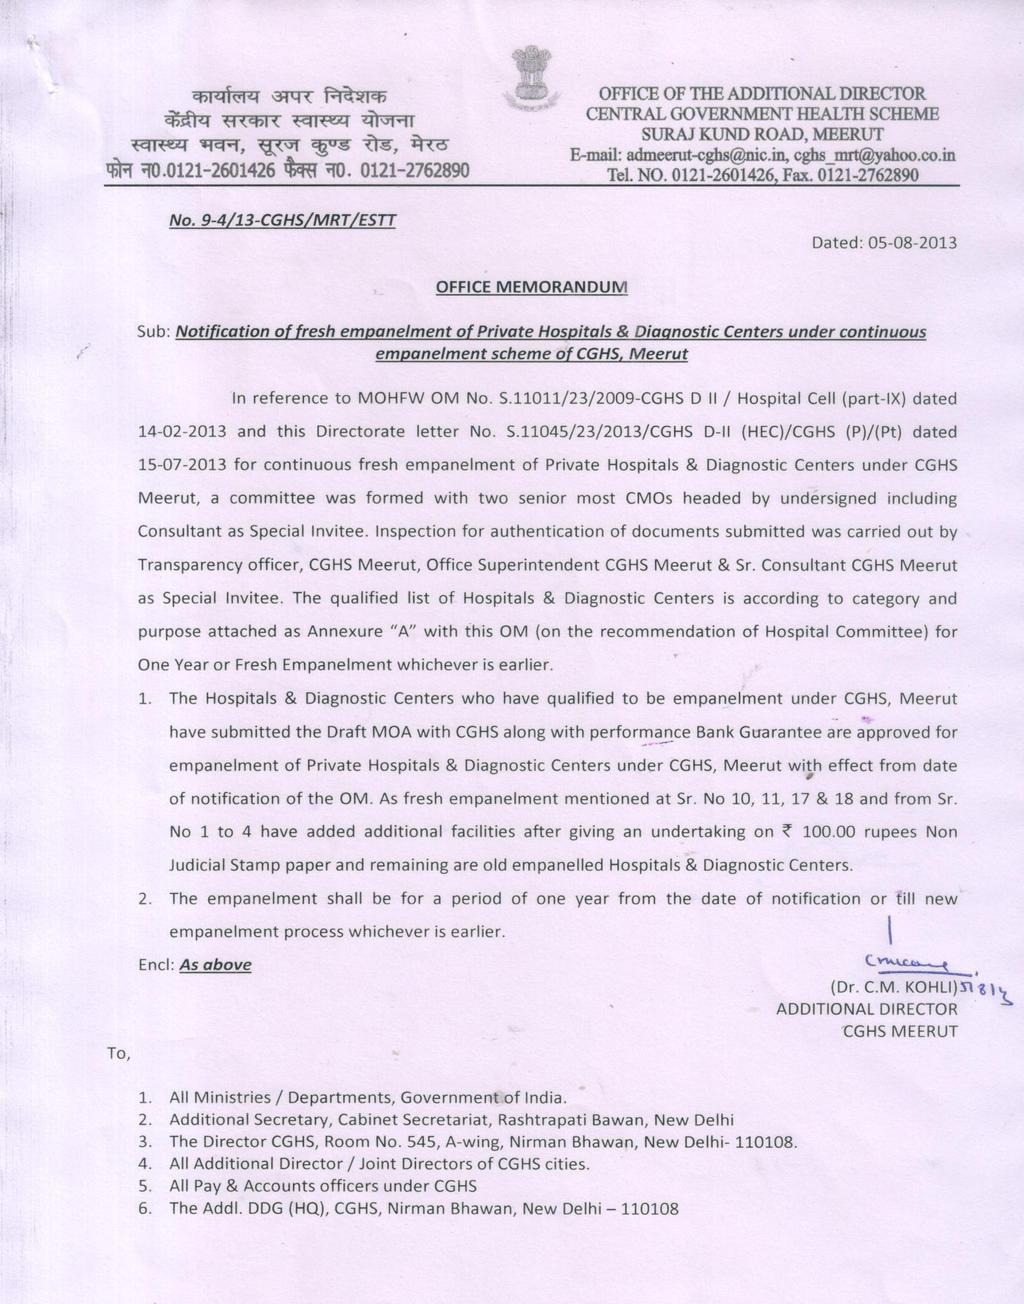 11011/23/2009-CGHS D II / Hospital Cell (part-ix) dated 14-02-2013 and this Directorate letter No. S.